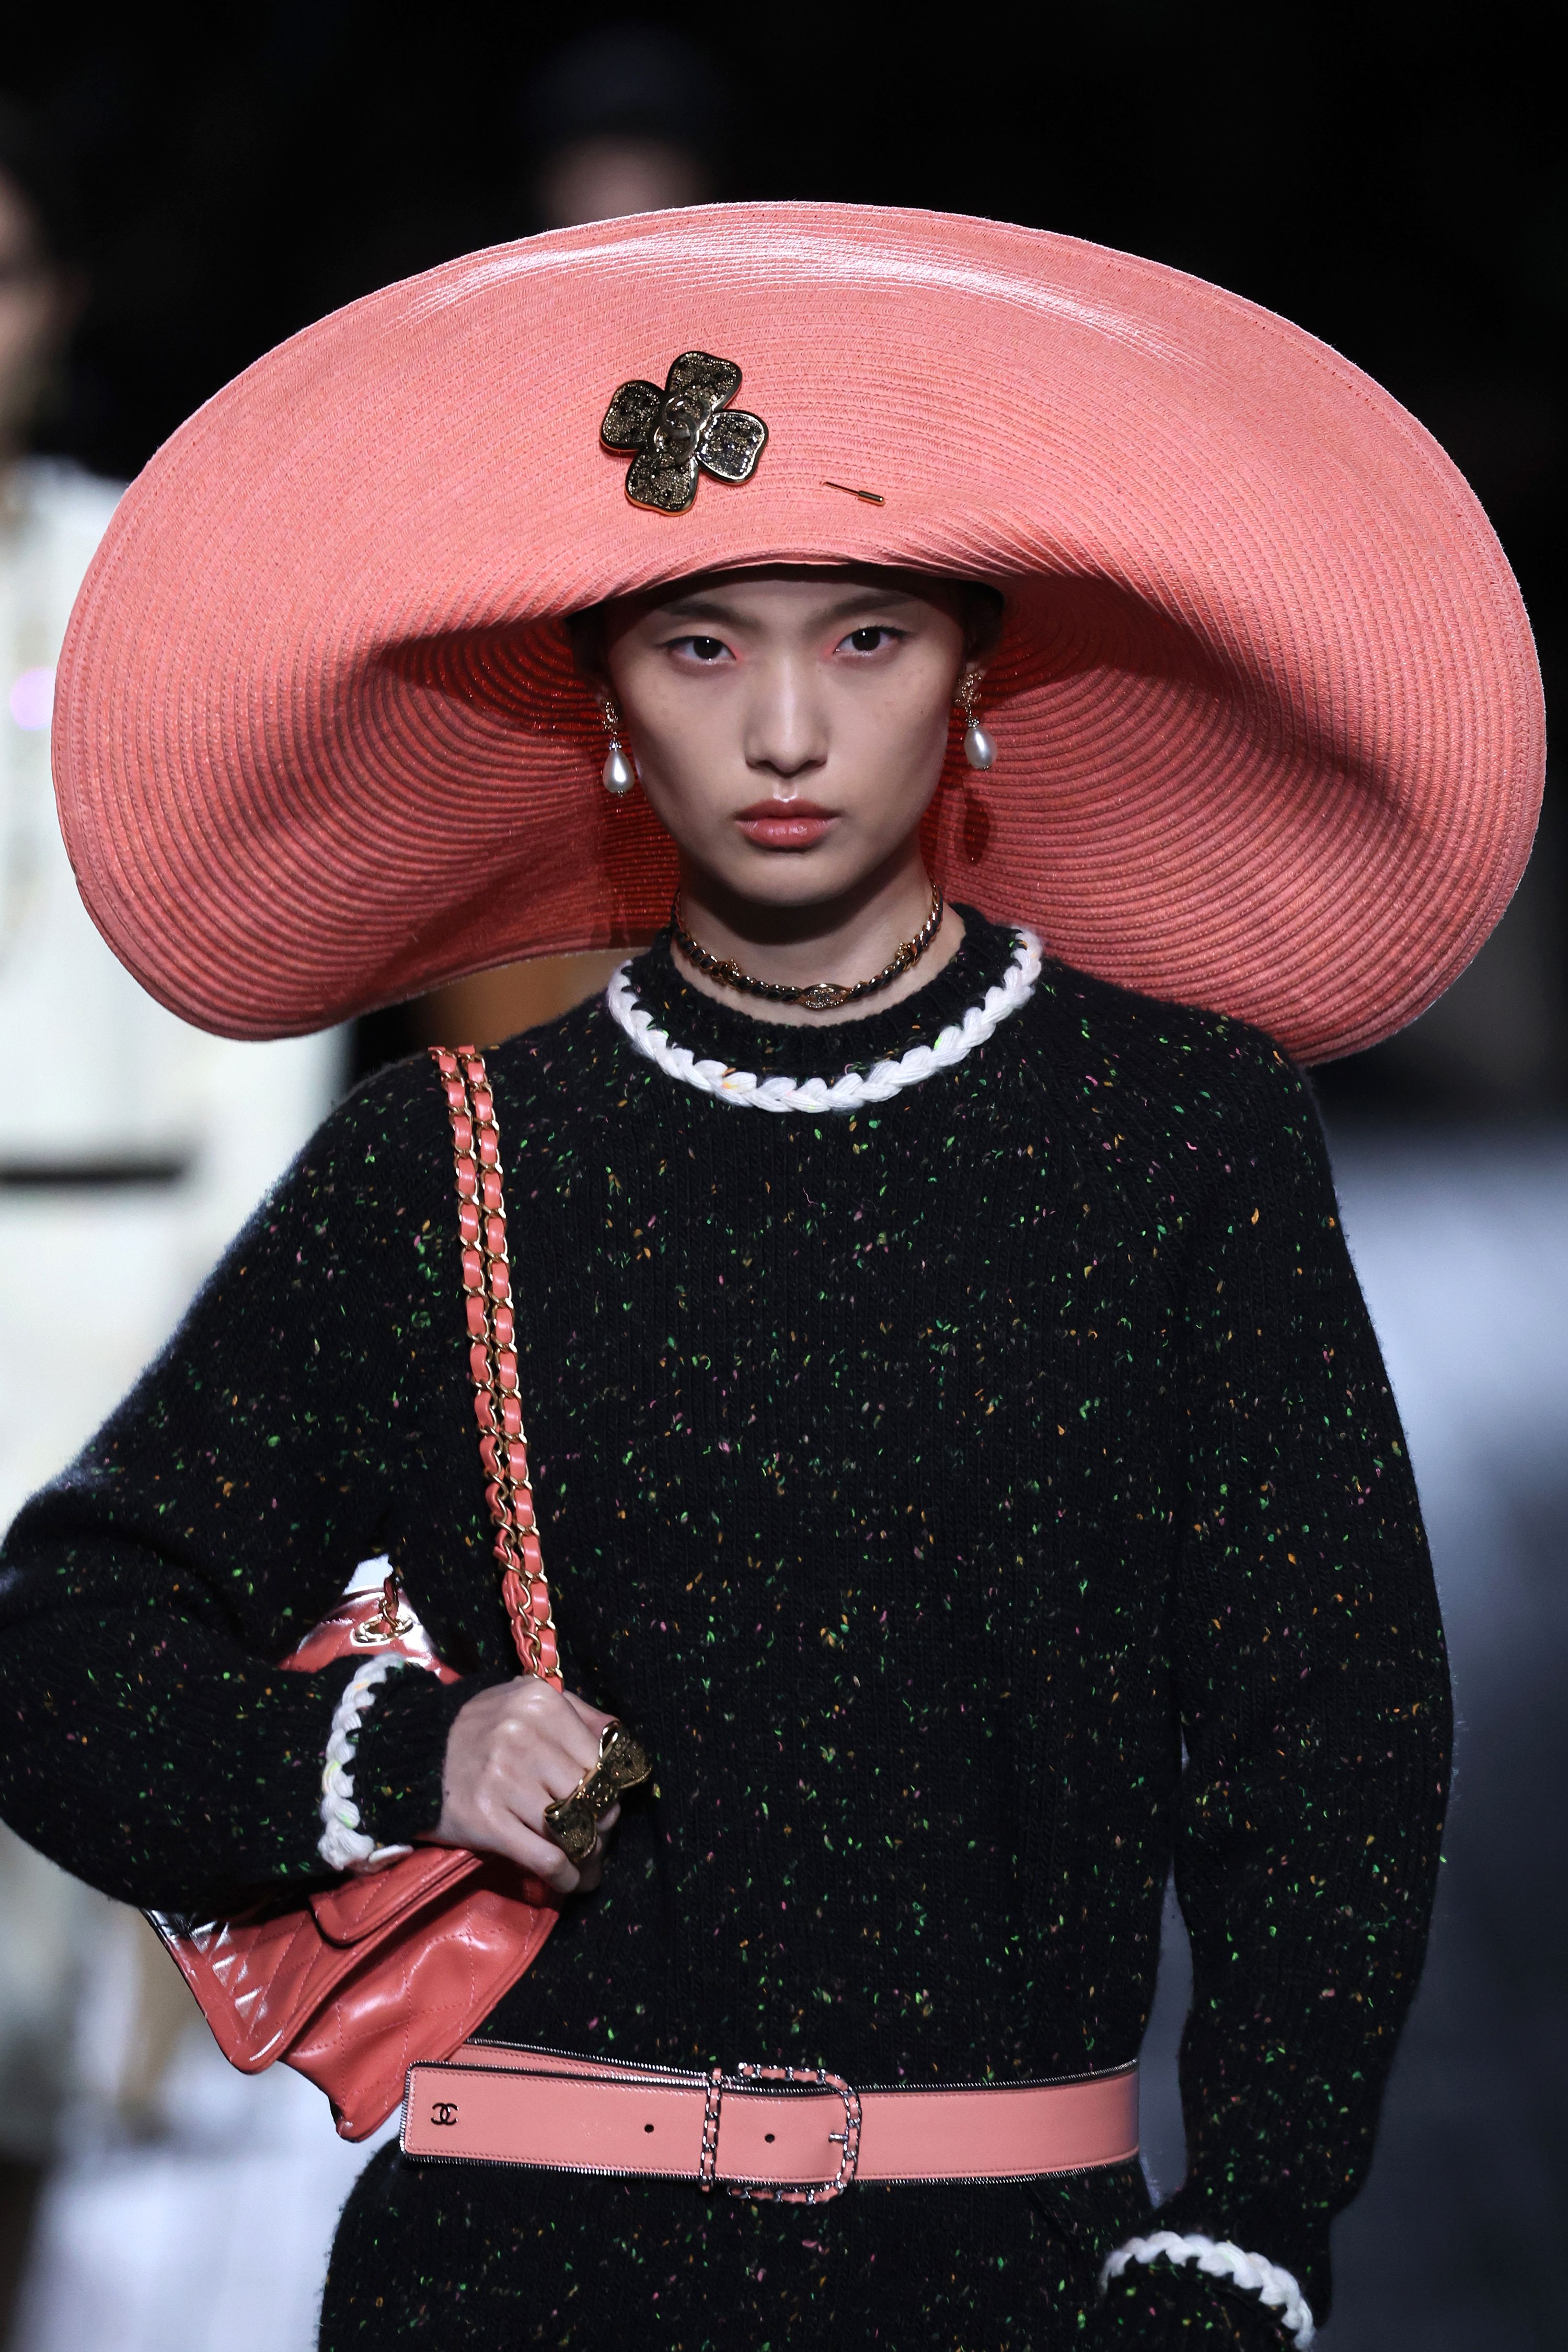 Oversized, floppy beach hats in a range of pink hues were a key feature at Chanel.